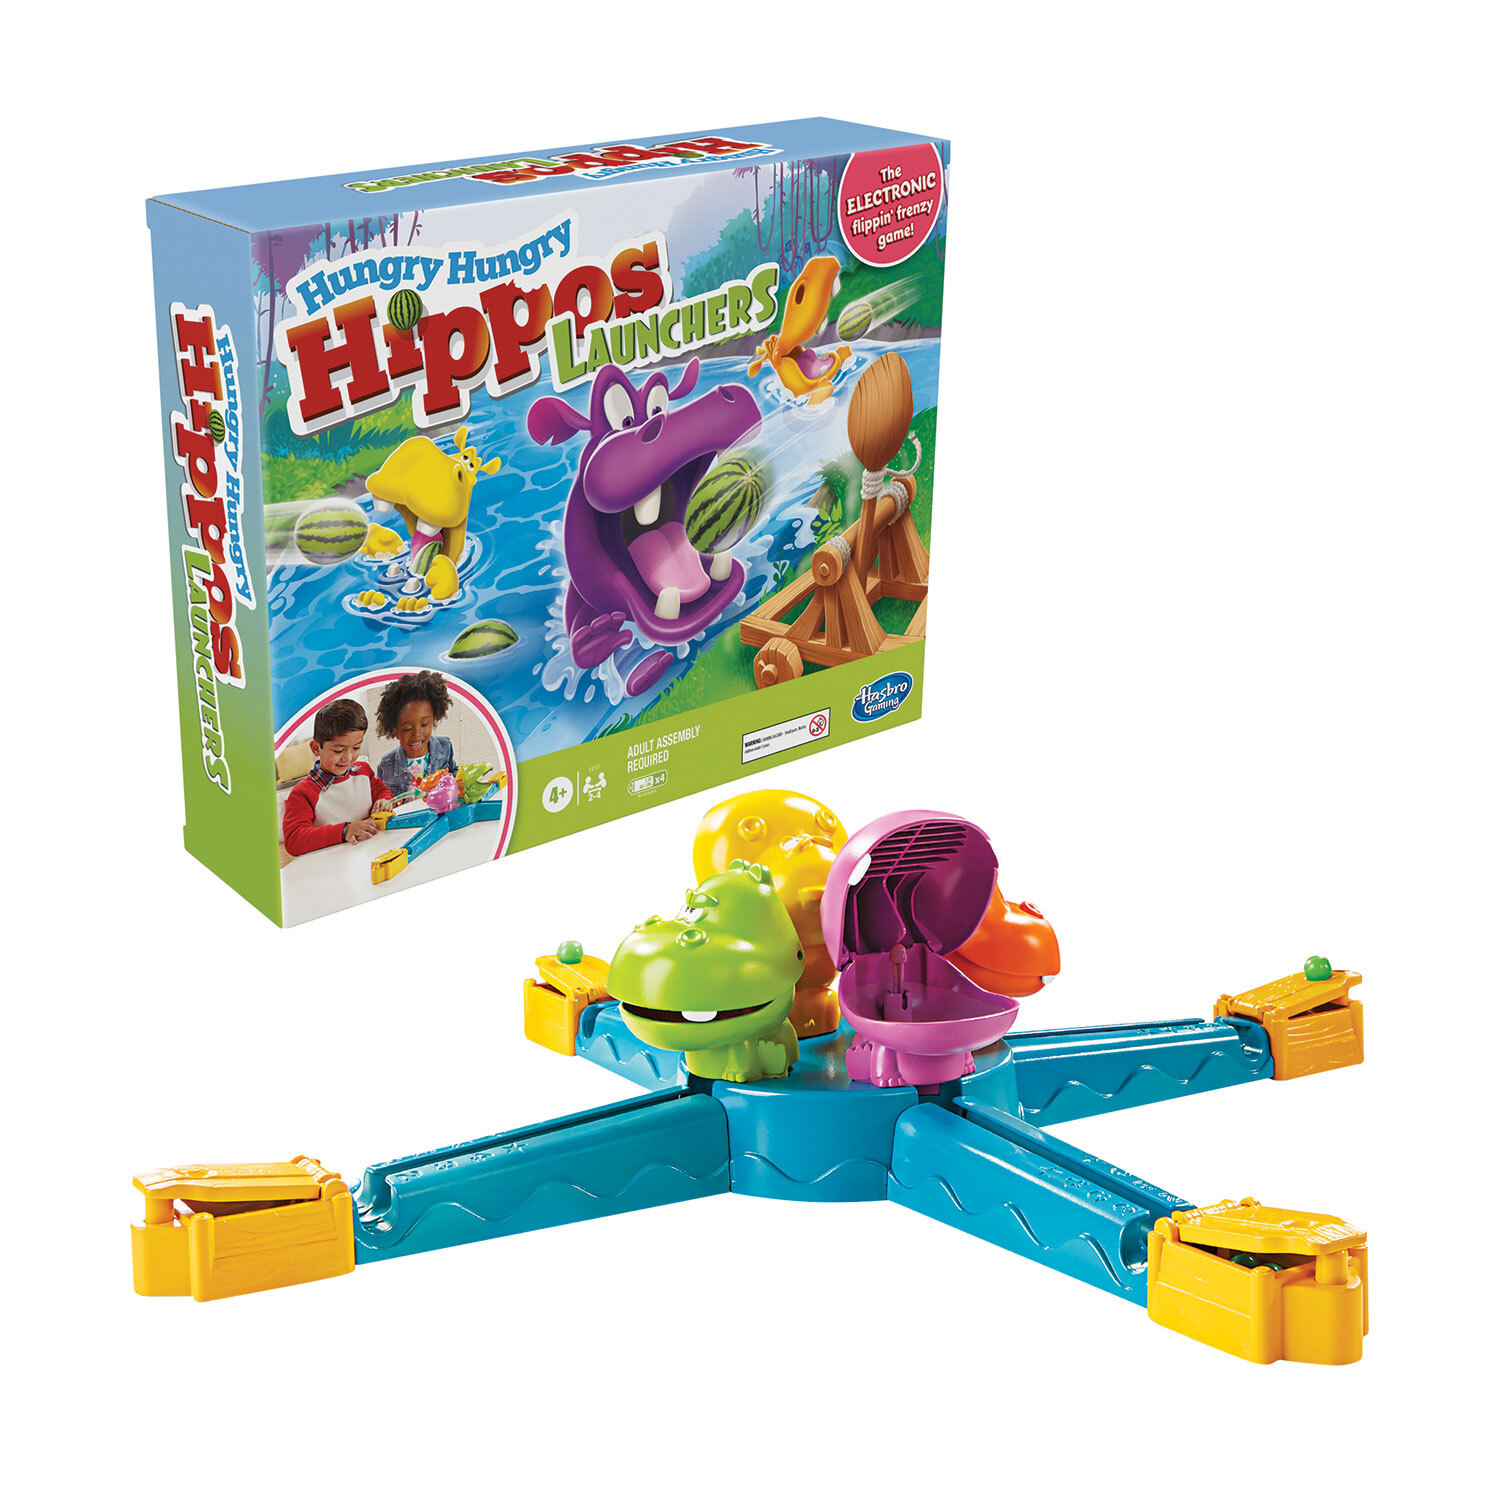 Hasbro Hungry Hungry Hippos Launchers Game Image 2